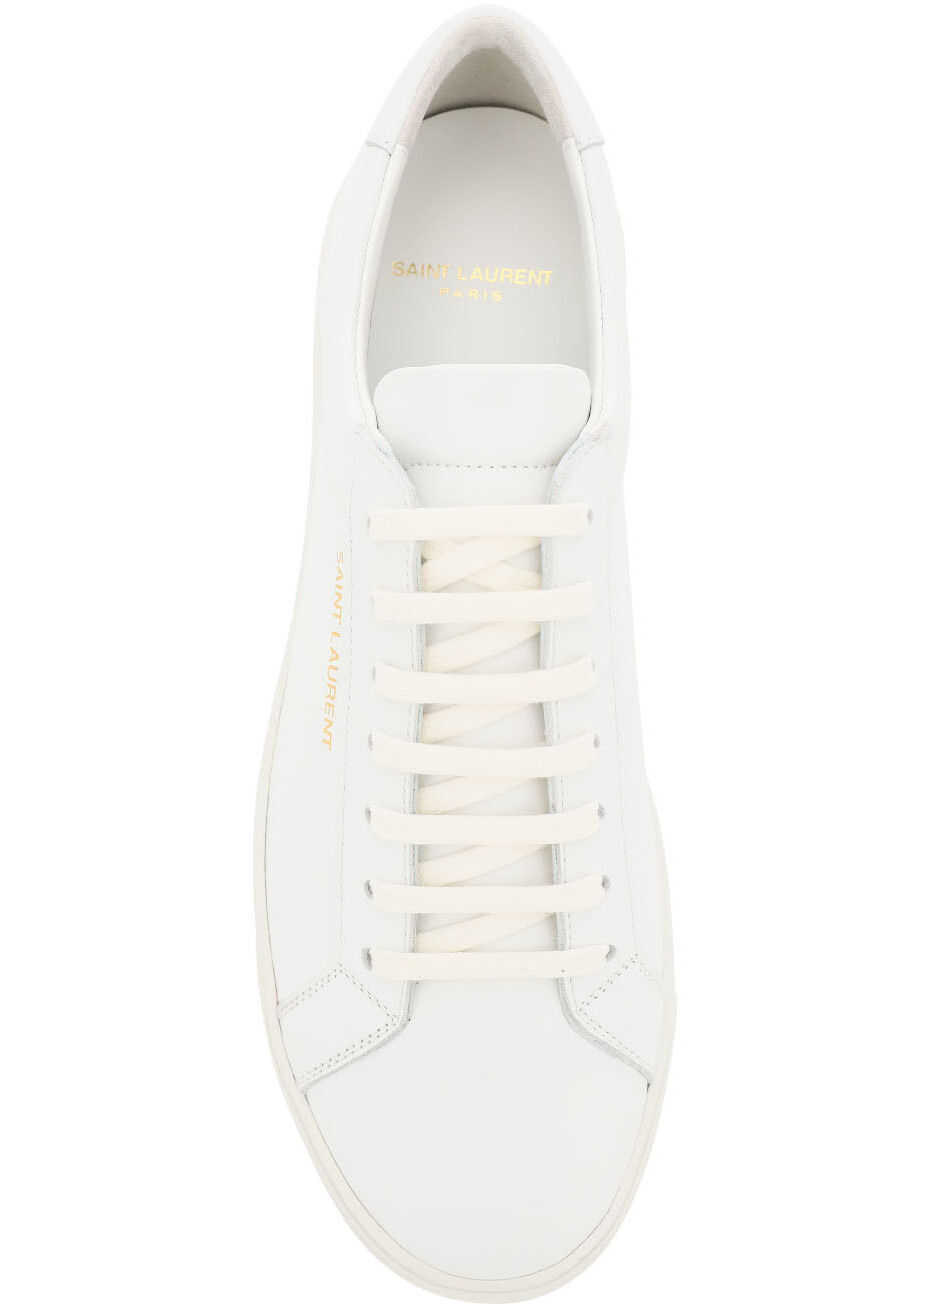 Saint Laurent Antdy Leather Sneakers BLANC OPTIQUE